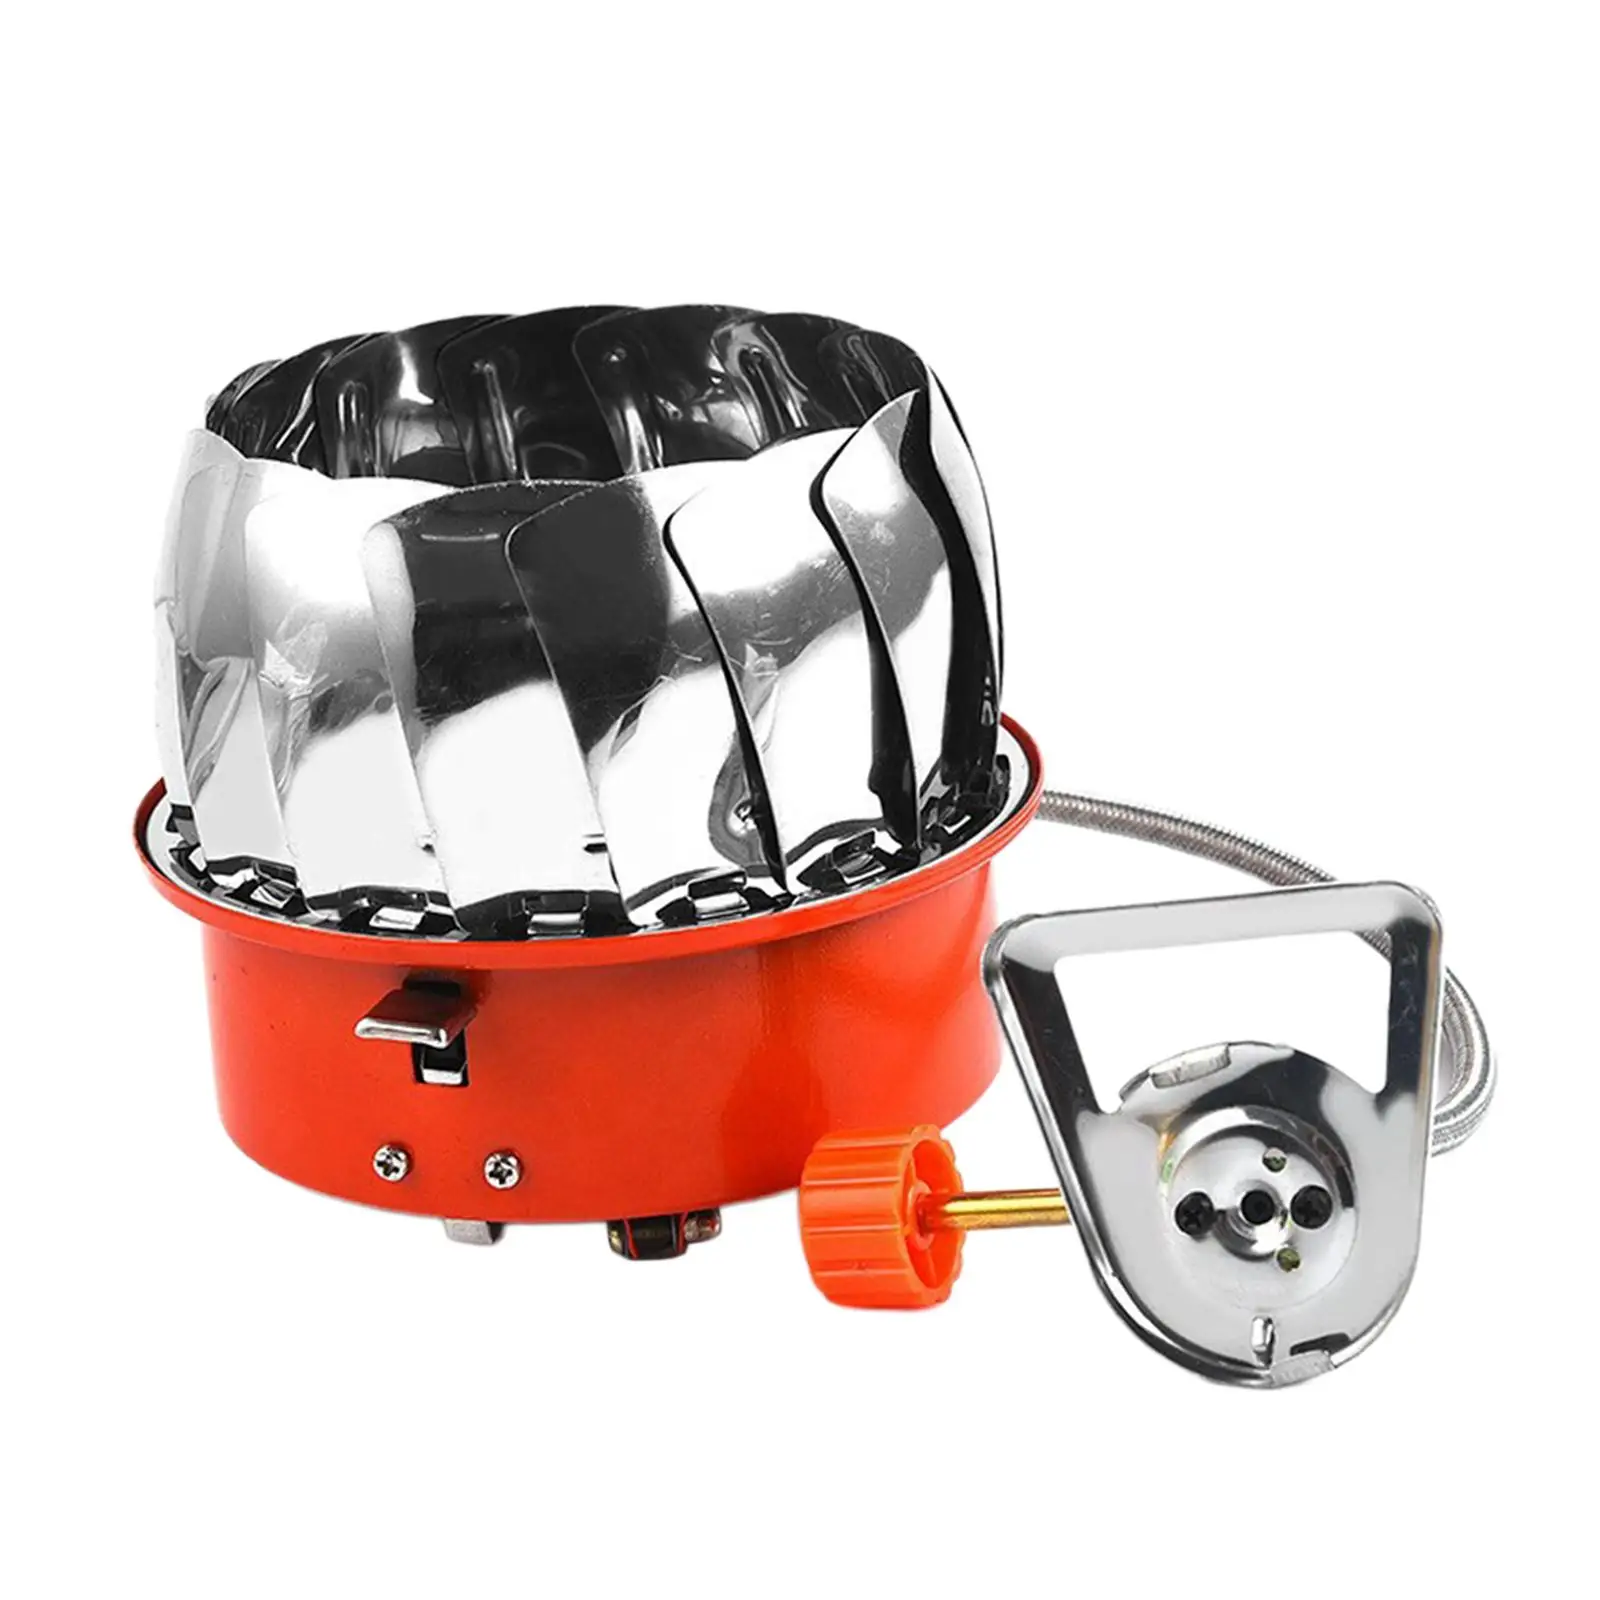 Camp Stove Backpacking Burner Lotus Stove for BBQ Fishing Mountaineering